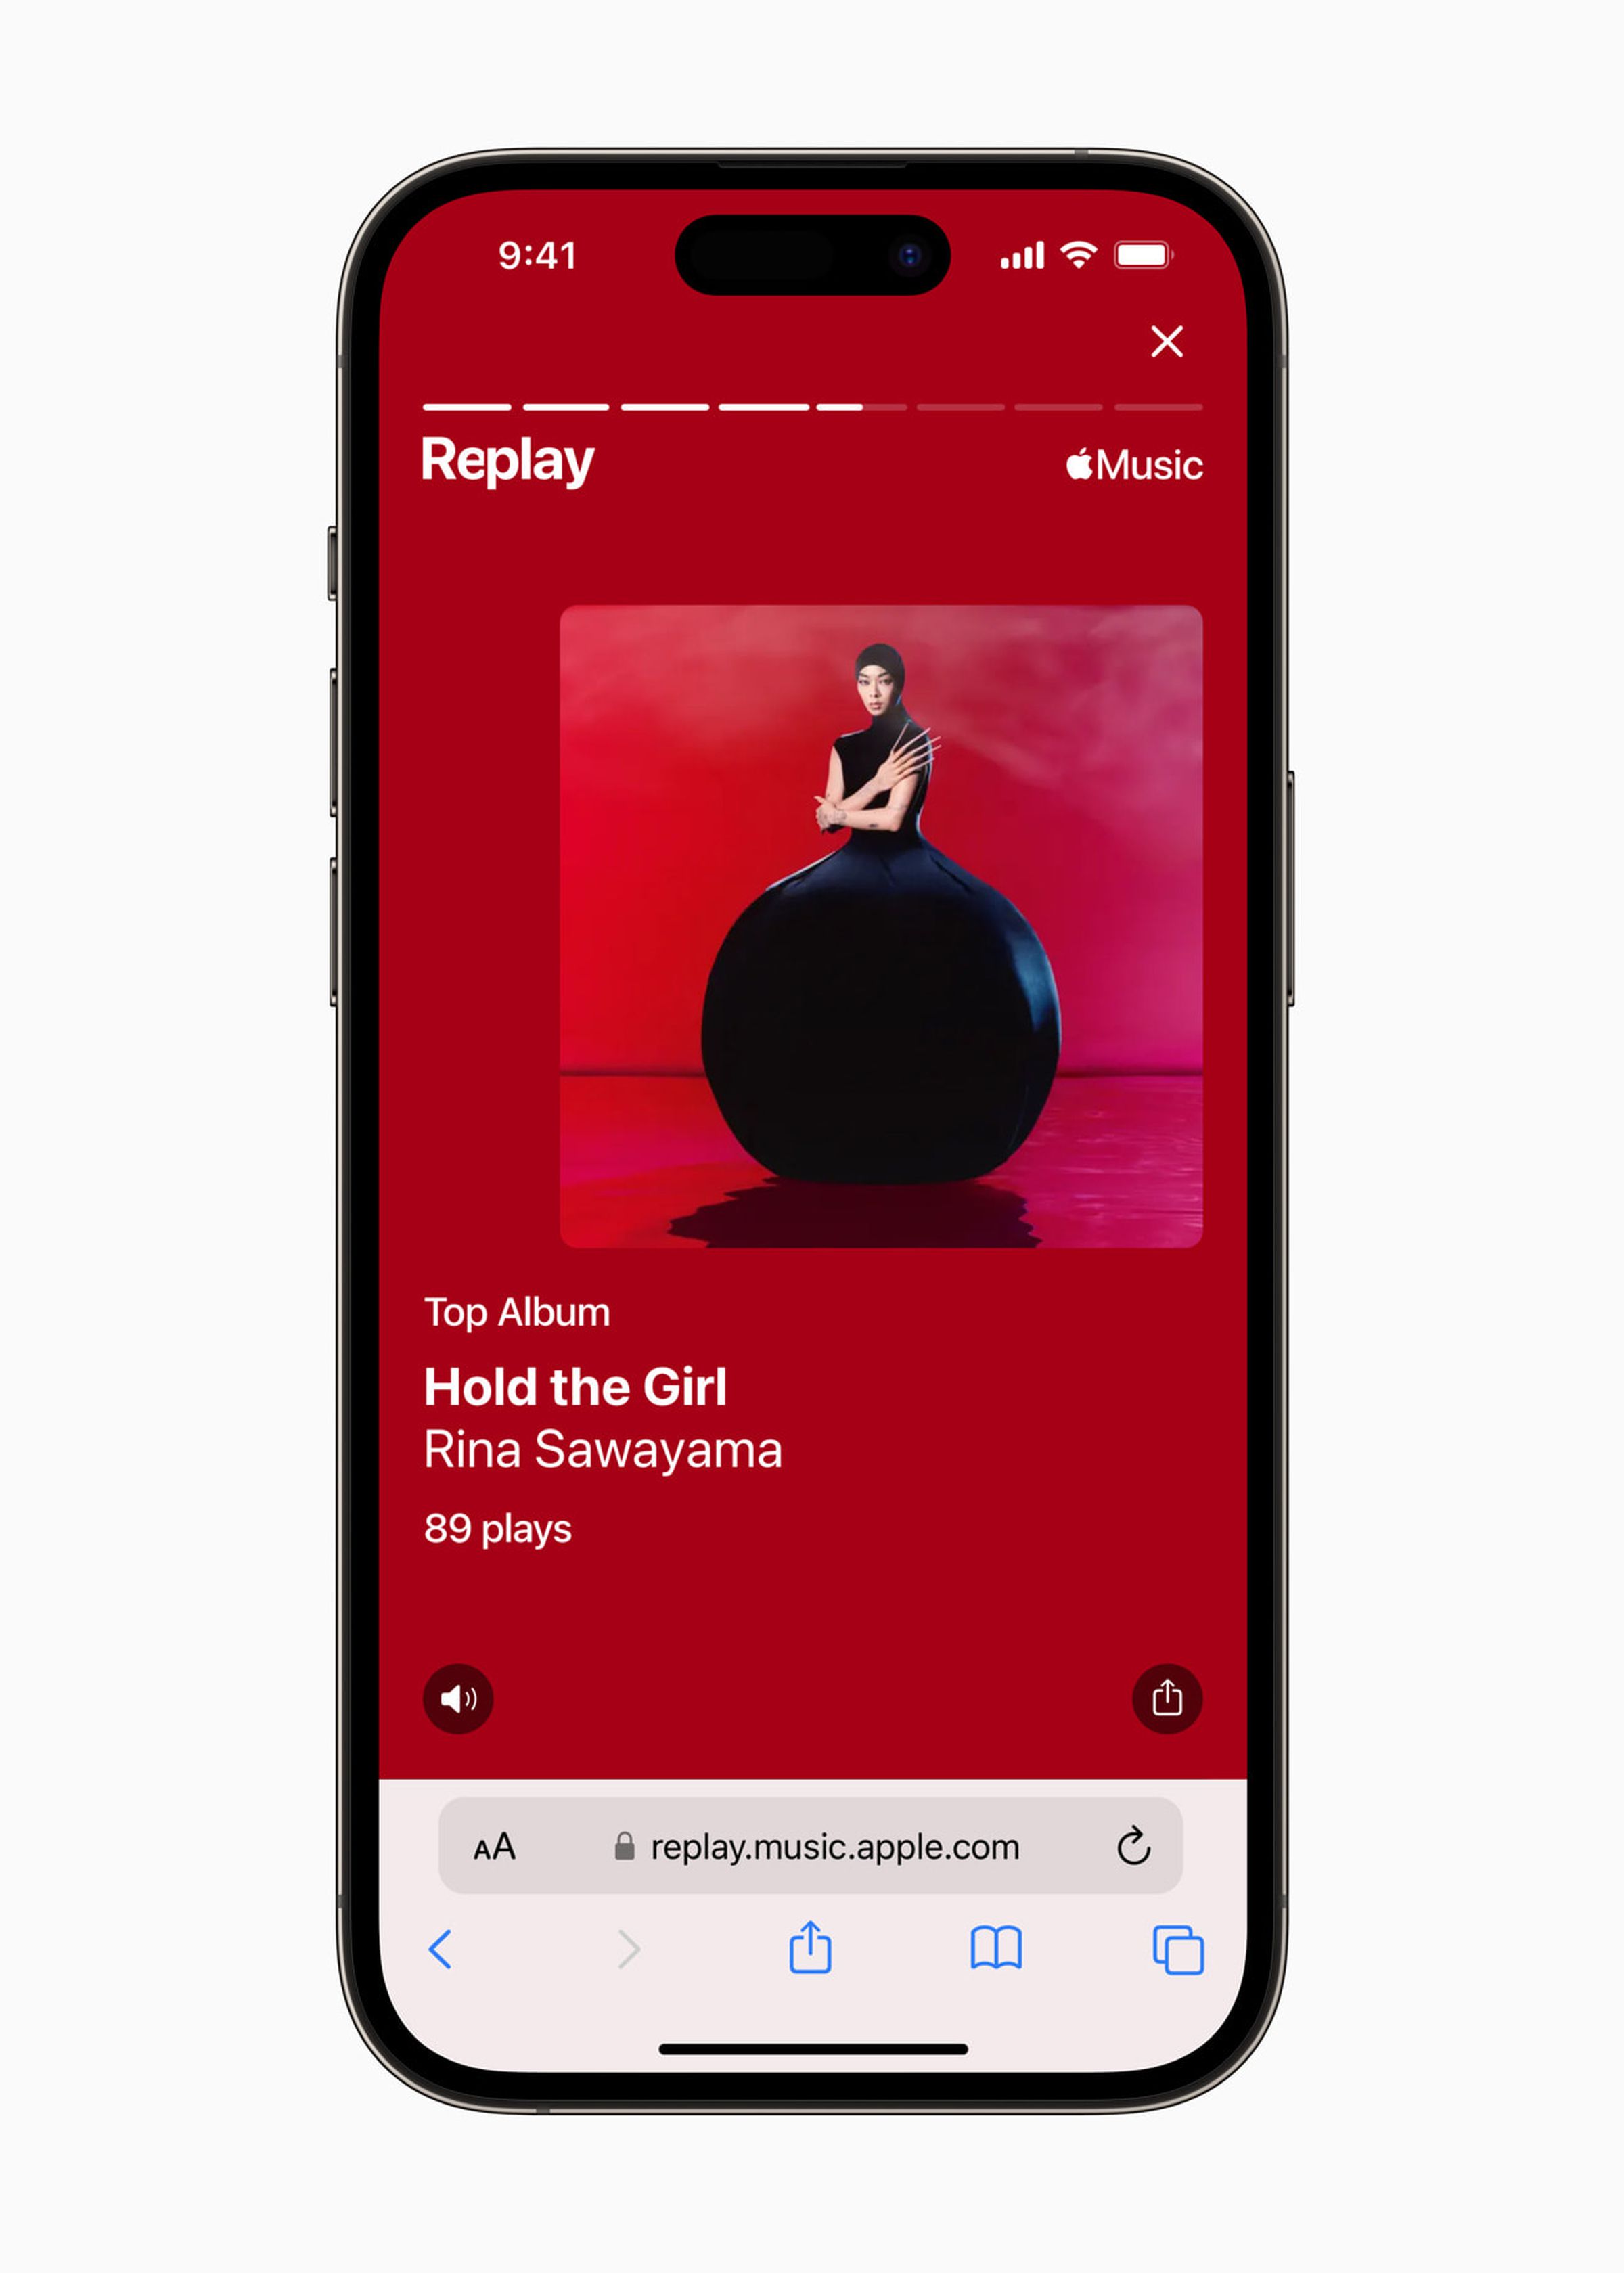 The Apple Music Replay image features a listener's best album, Hold the Girl by Rina Sawayama.